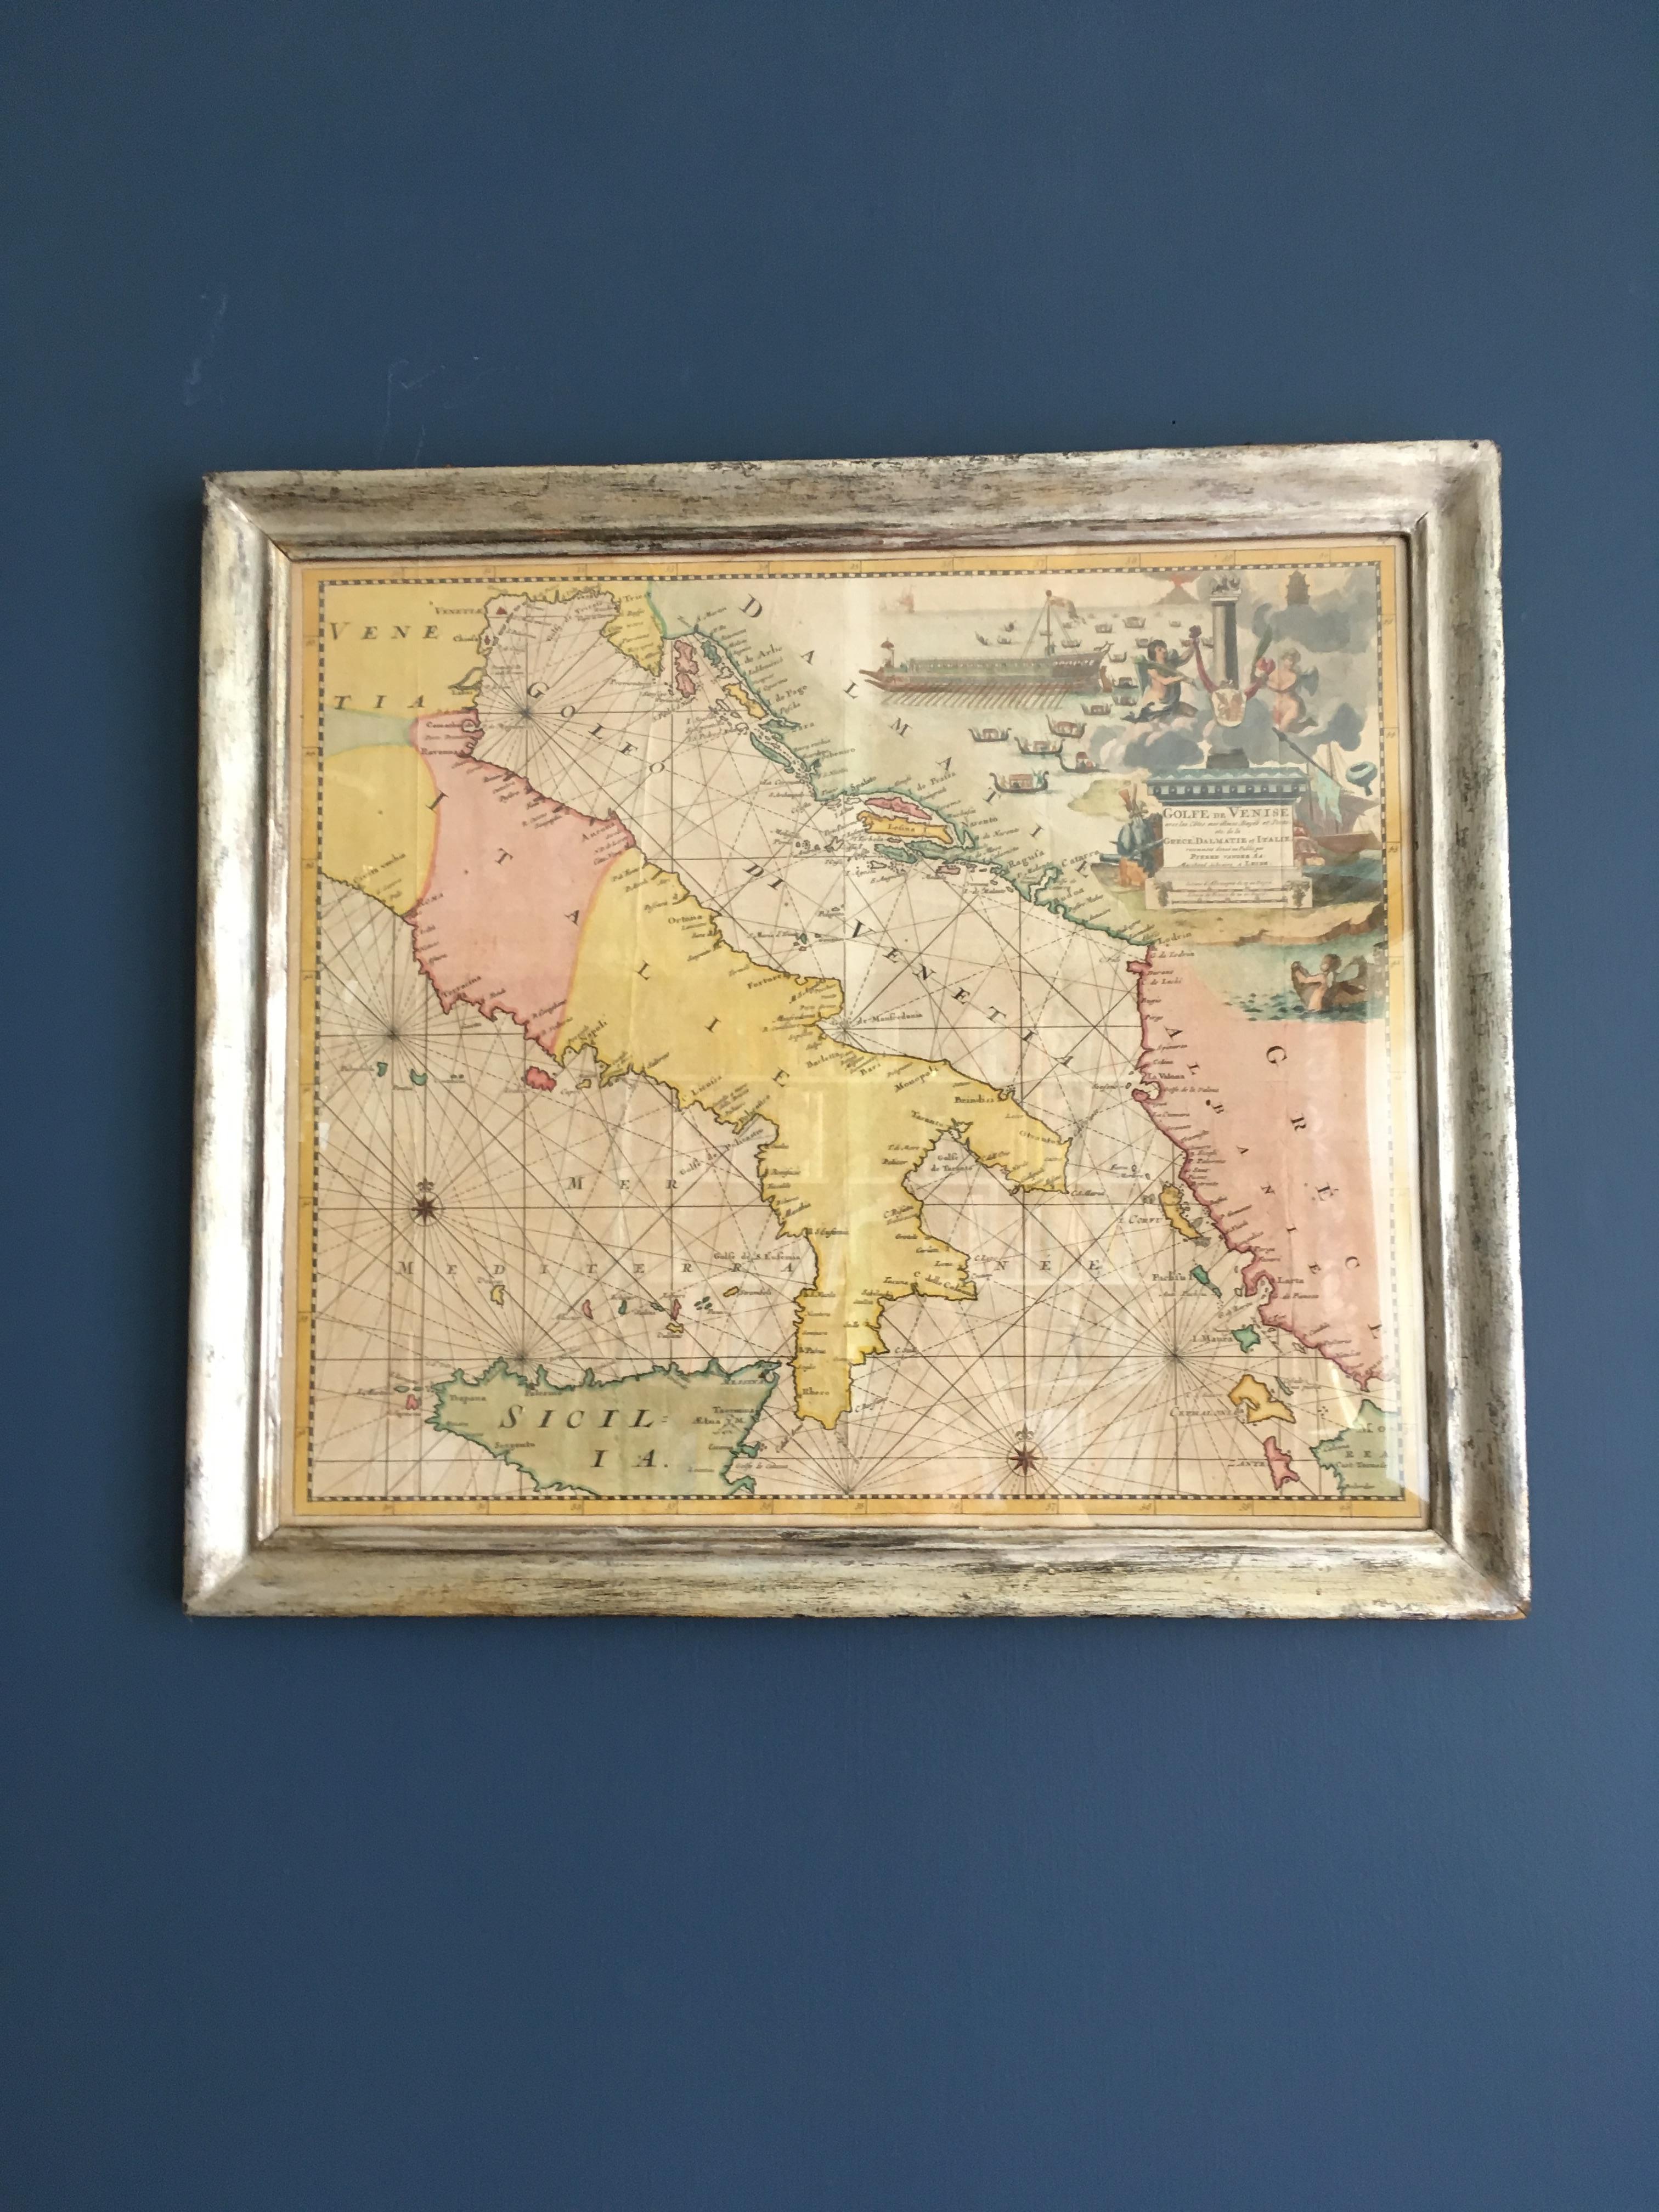 Other Antique Hand Colored Map of Venice Italy Late 18th-Century